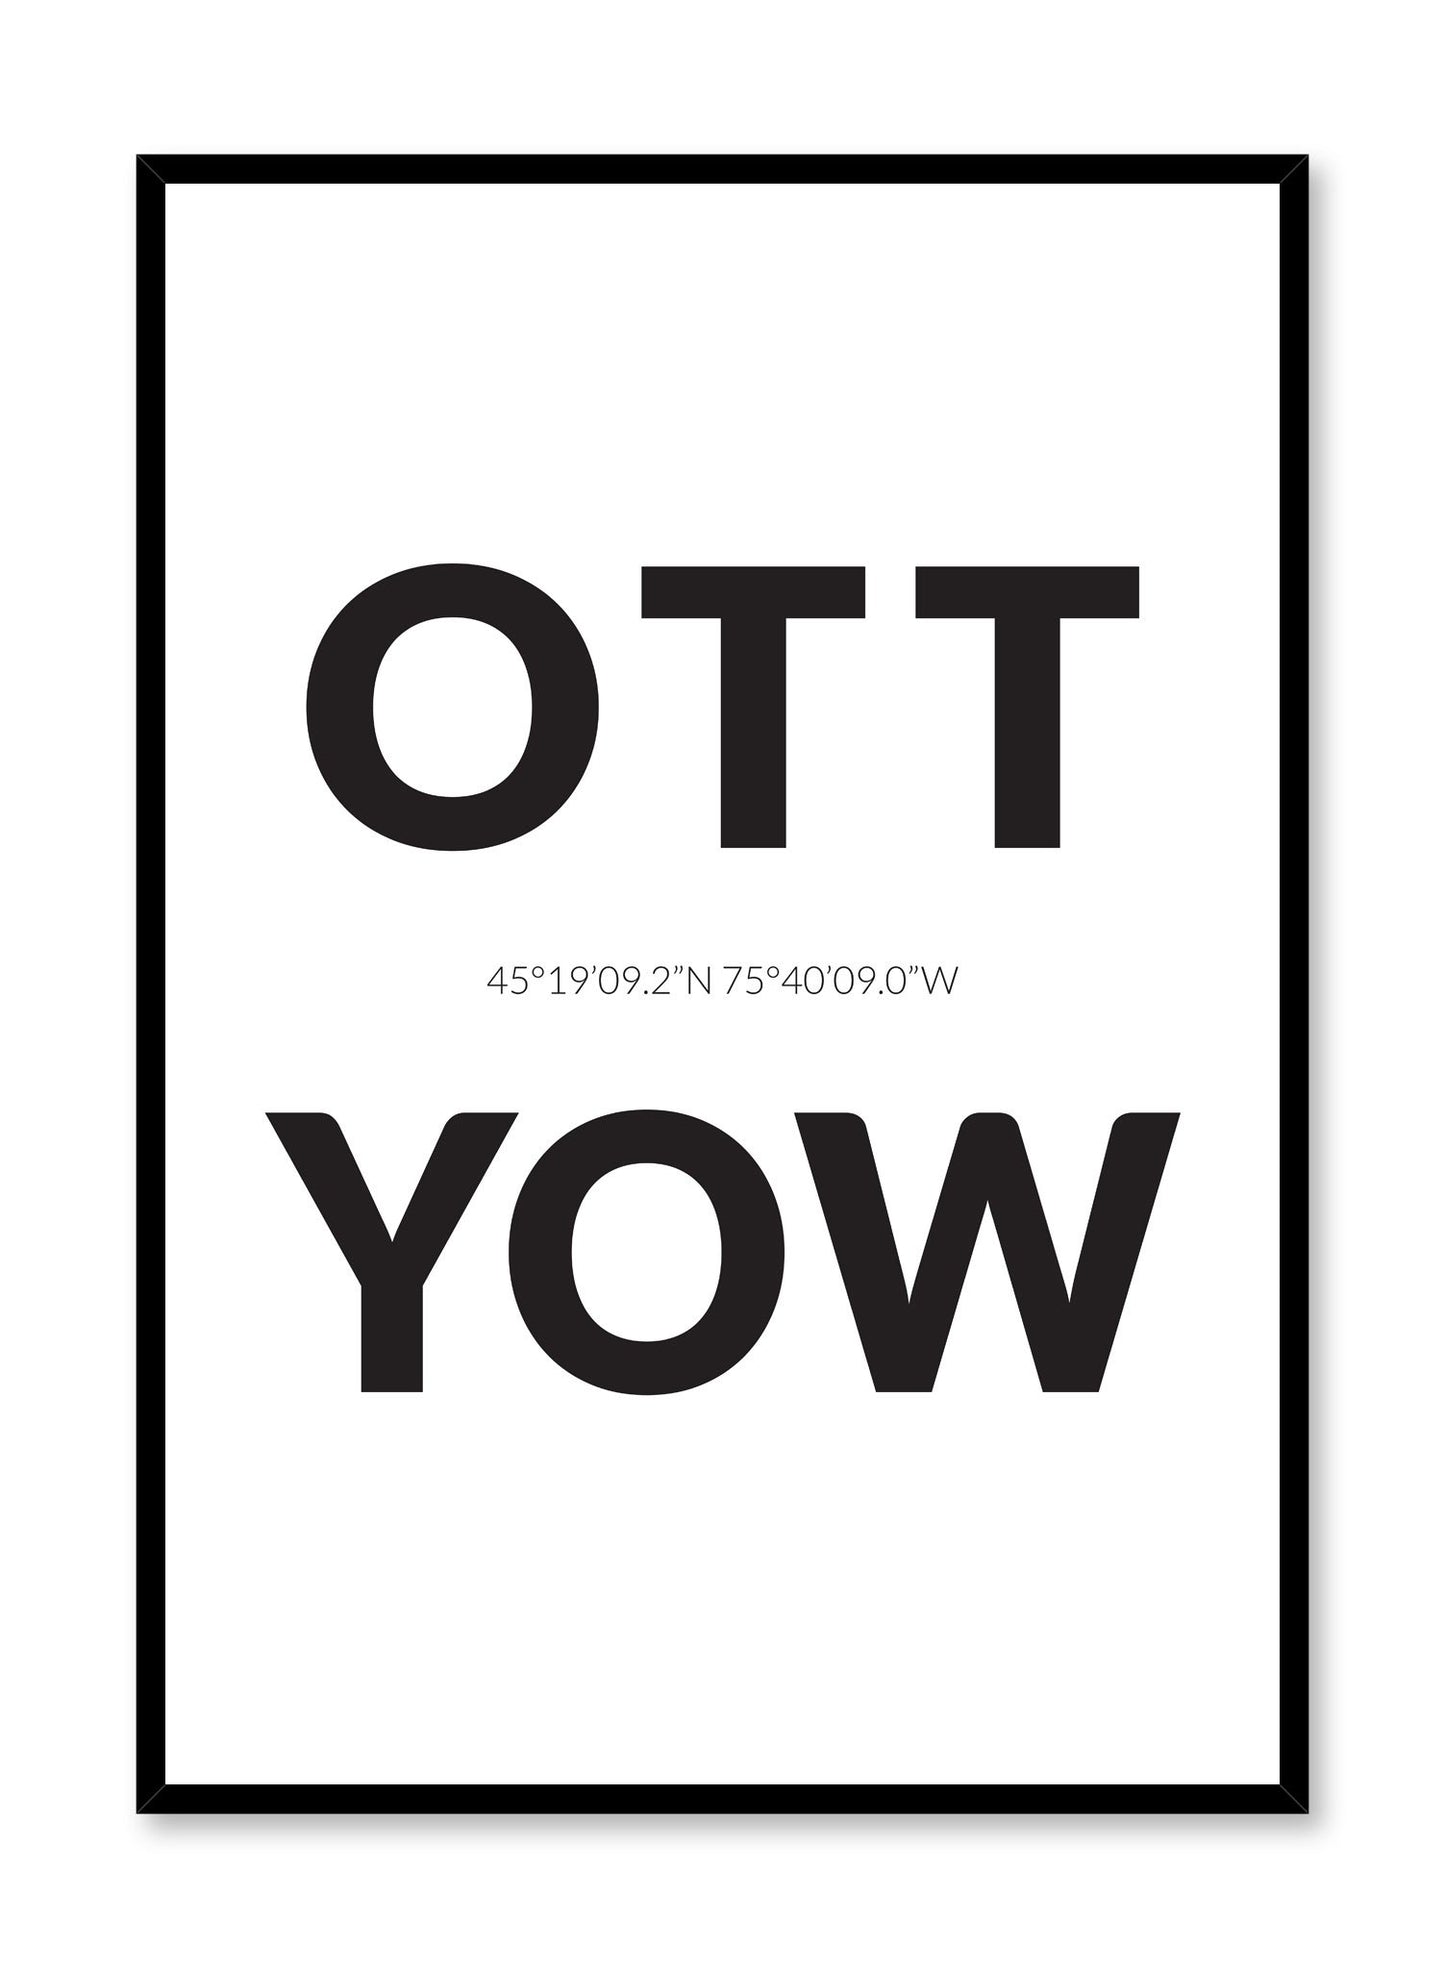 Minimalist design poster by Opposite Wall with airport code Ottawa YOW